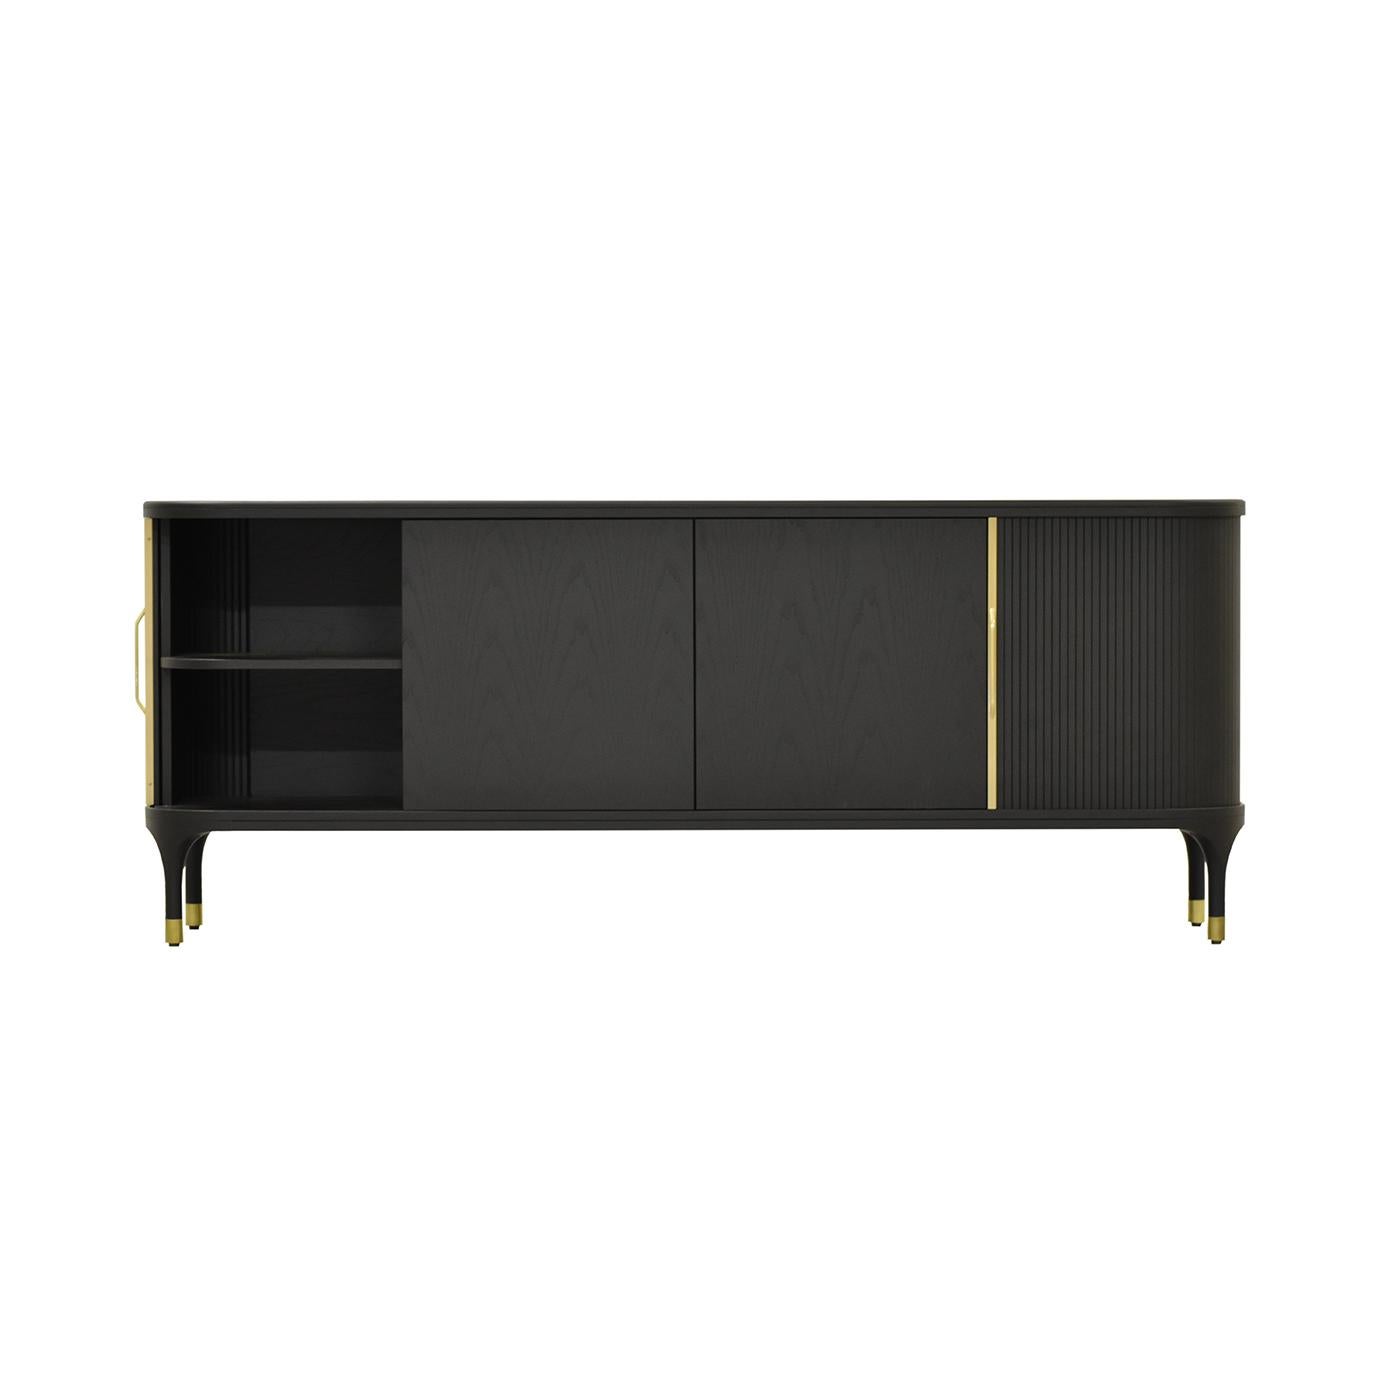 Standing on four tapered feet embellished with brass details, this sideboard is a sophisticated piece suitable for a wide variety of decors. The solid ash structure showcases an elegant black finish, which fits with the grooved texture of the two